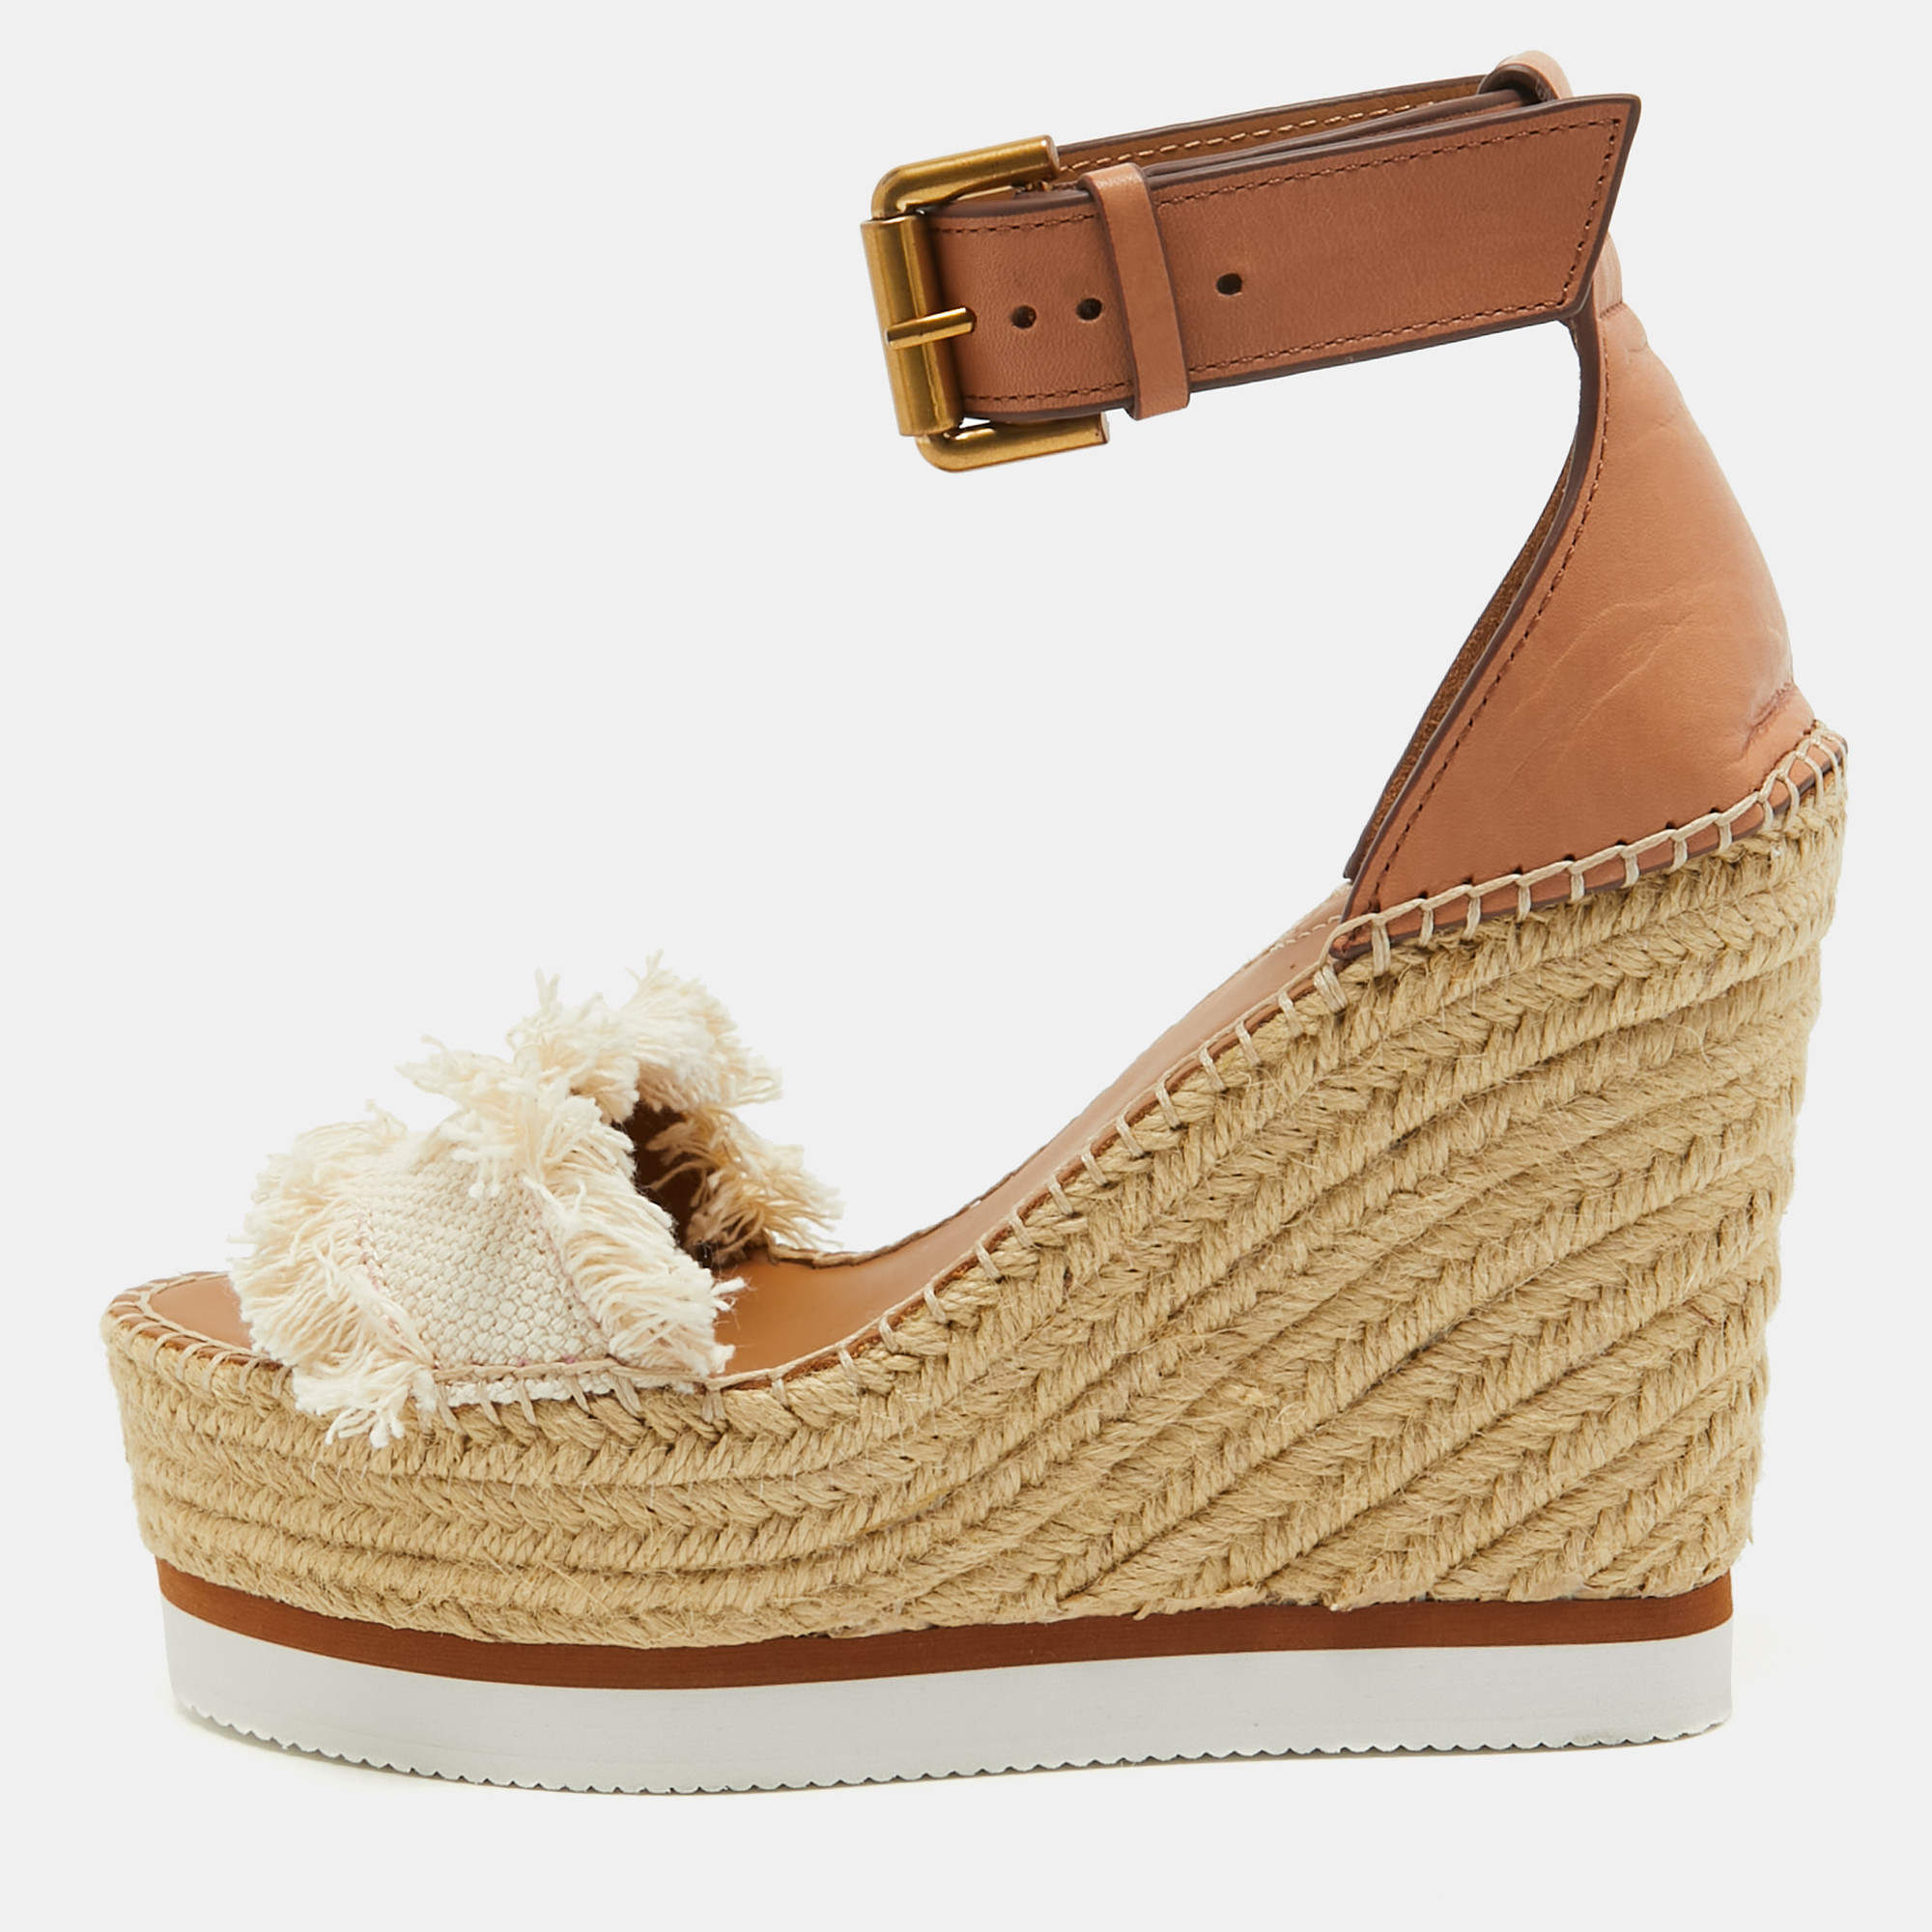 See By Chloe White/Brown Canvas And Leather Espadrille Wedge Sandals Size 36